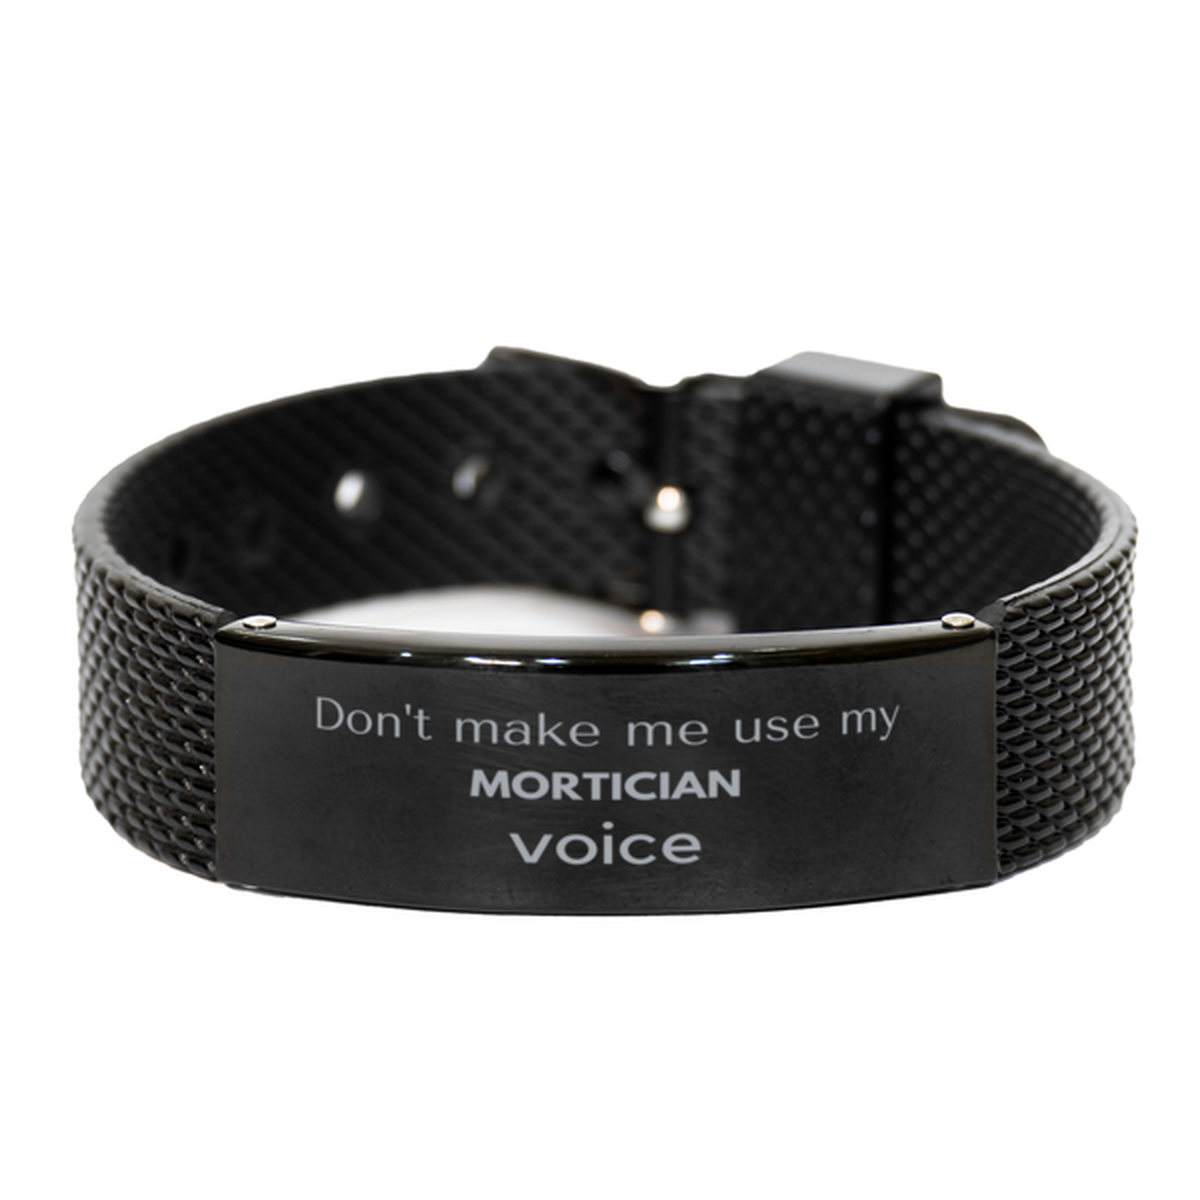 Don't make me use my Mortician voice, Sarcasm Mortician Gifts, Christmas Mortician Black Shark Mesh Bracelet Birthday Unique Gifts For Mortician Coworkers, Men, Women, Colleague, Friends